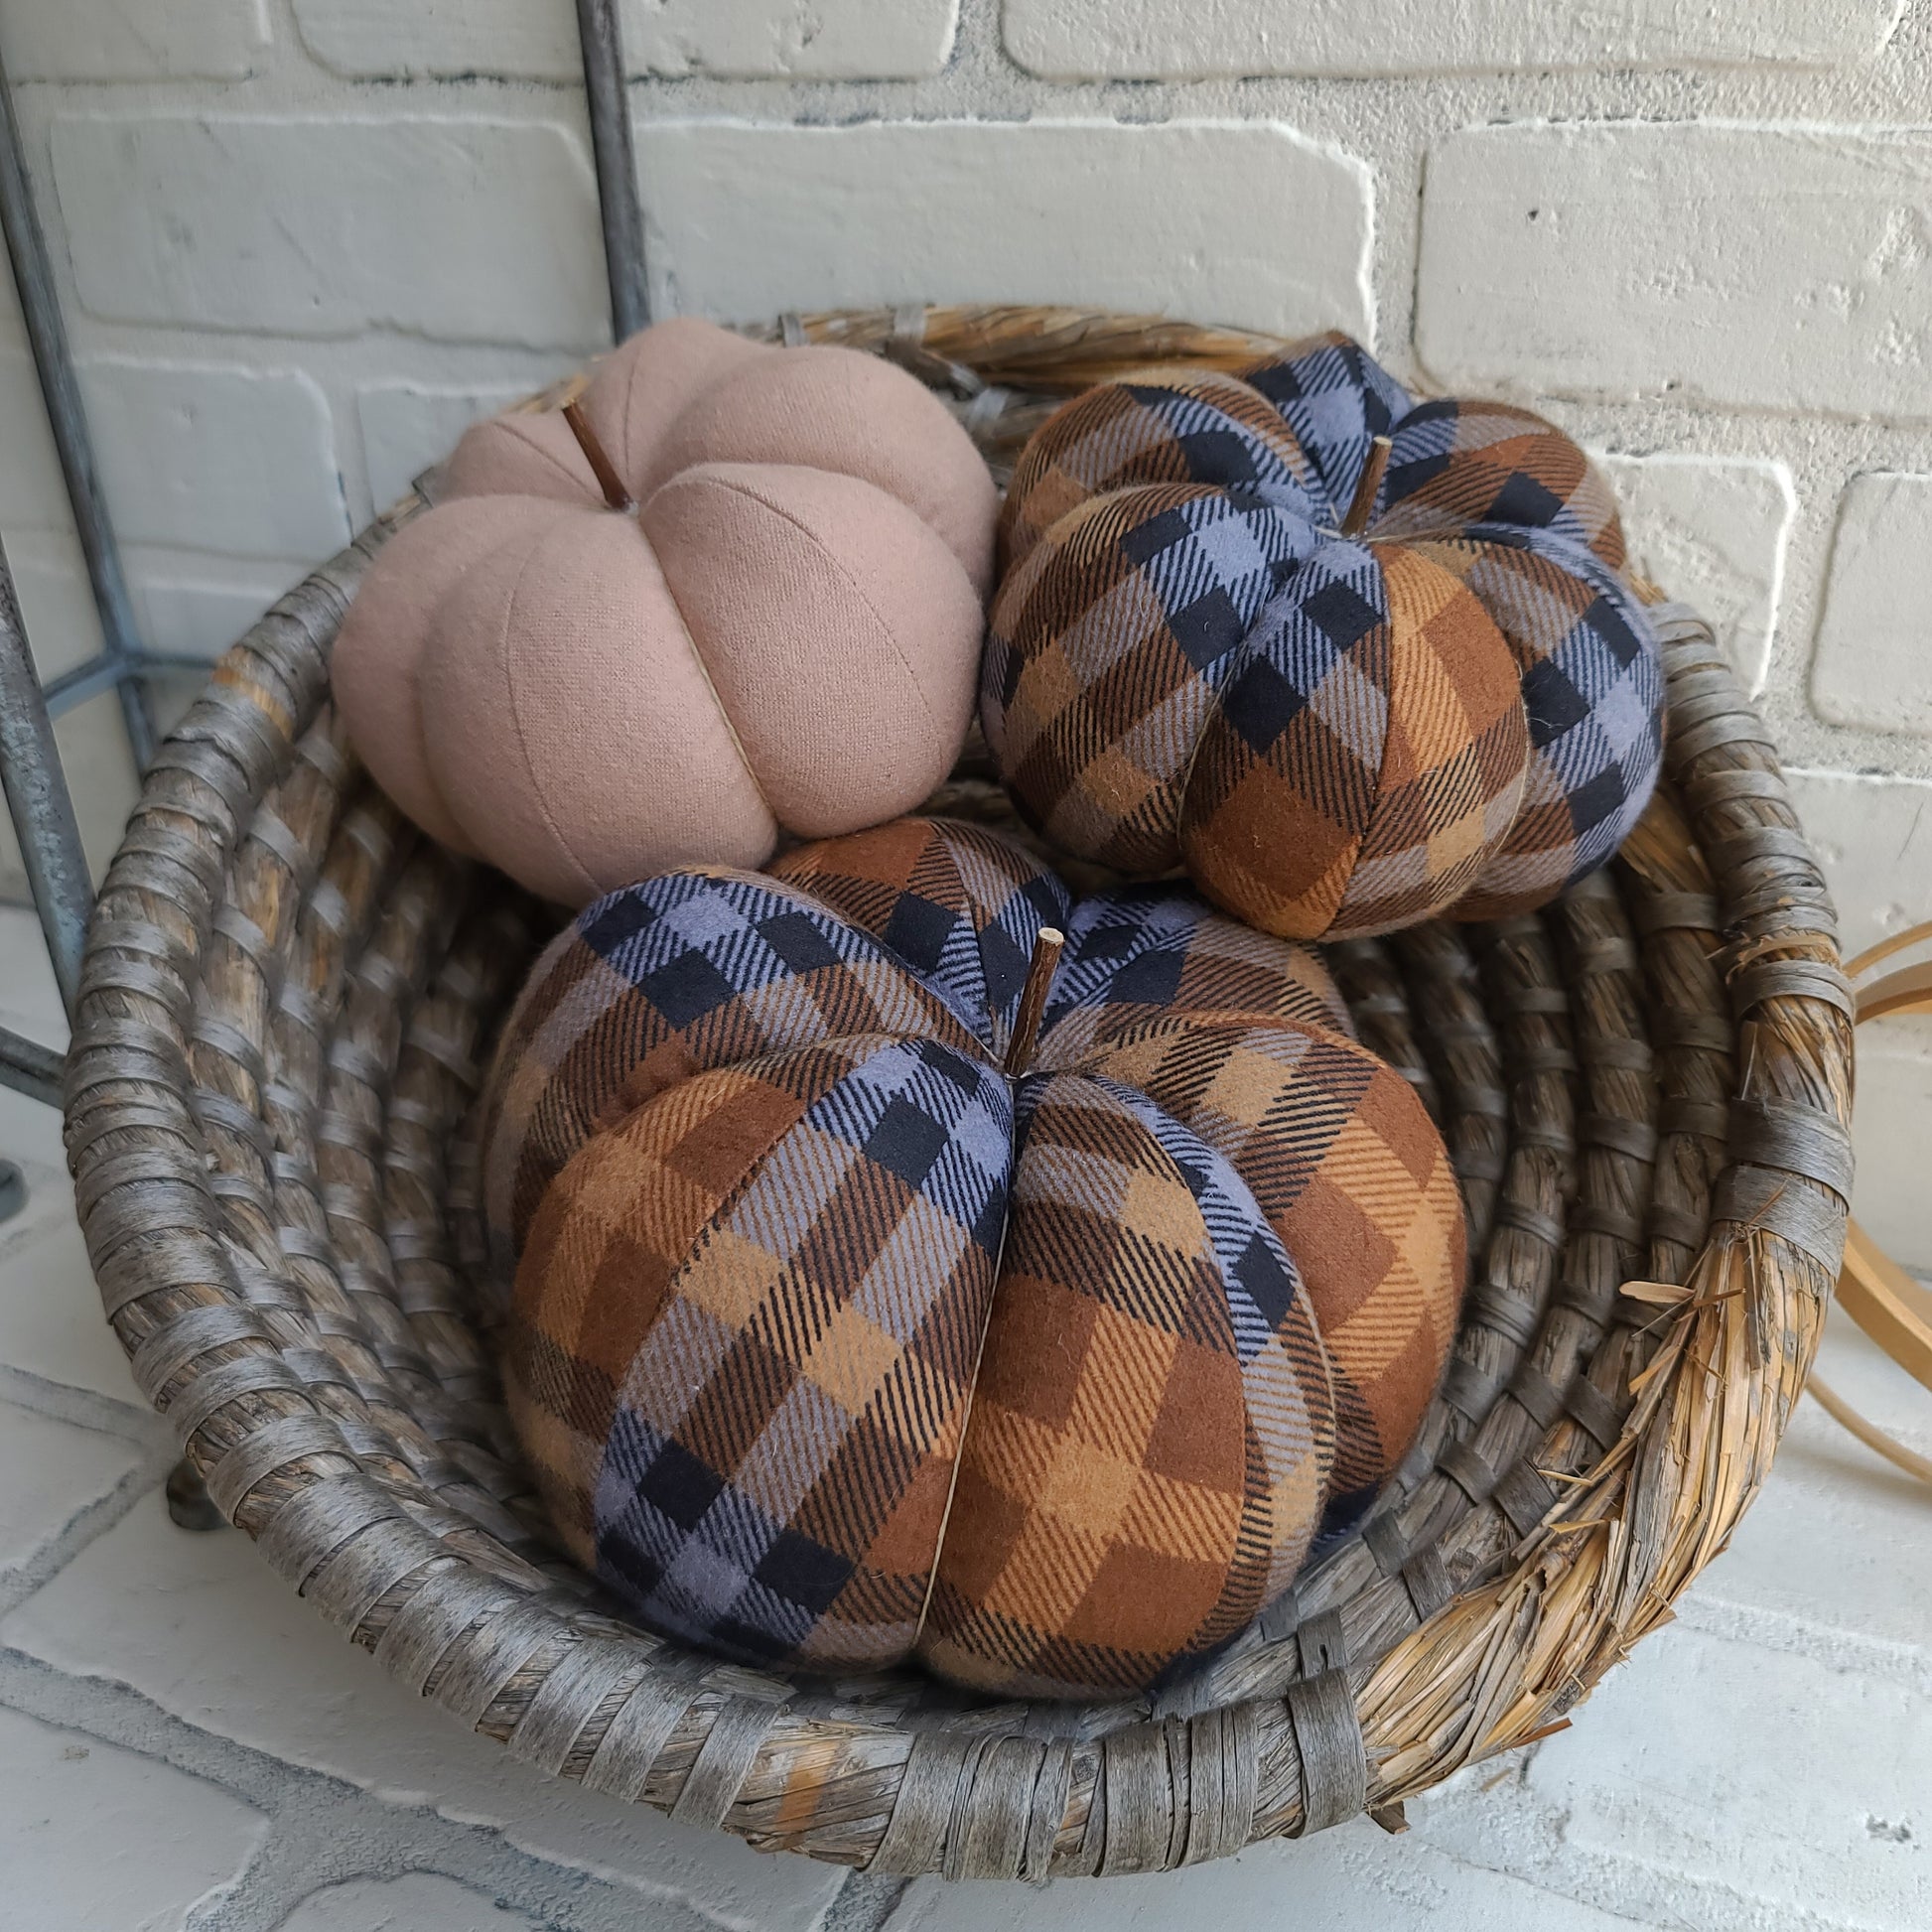 Pumpkin trio set in Chocolate plaid. One large & one small in Chocolate plaid and one small in solid tan color. Displayed in hand woven basket